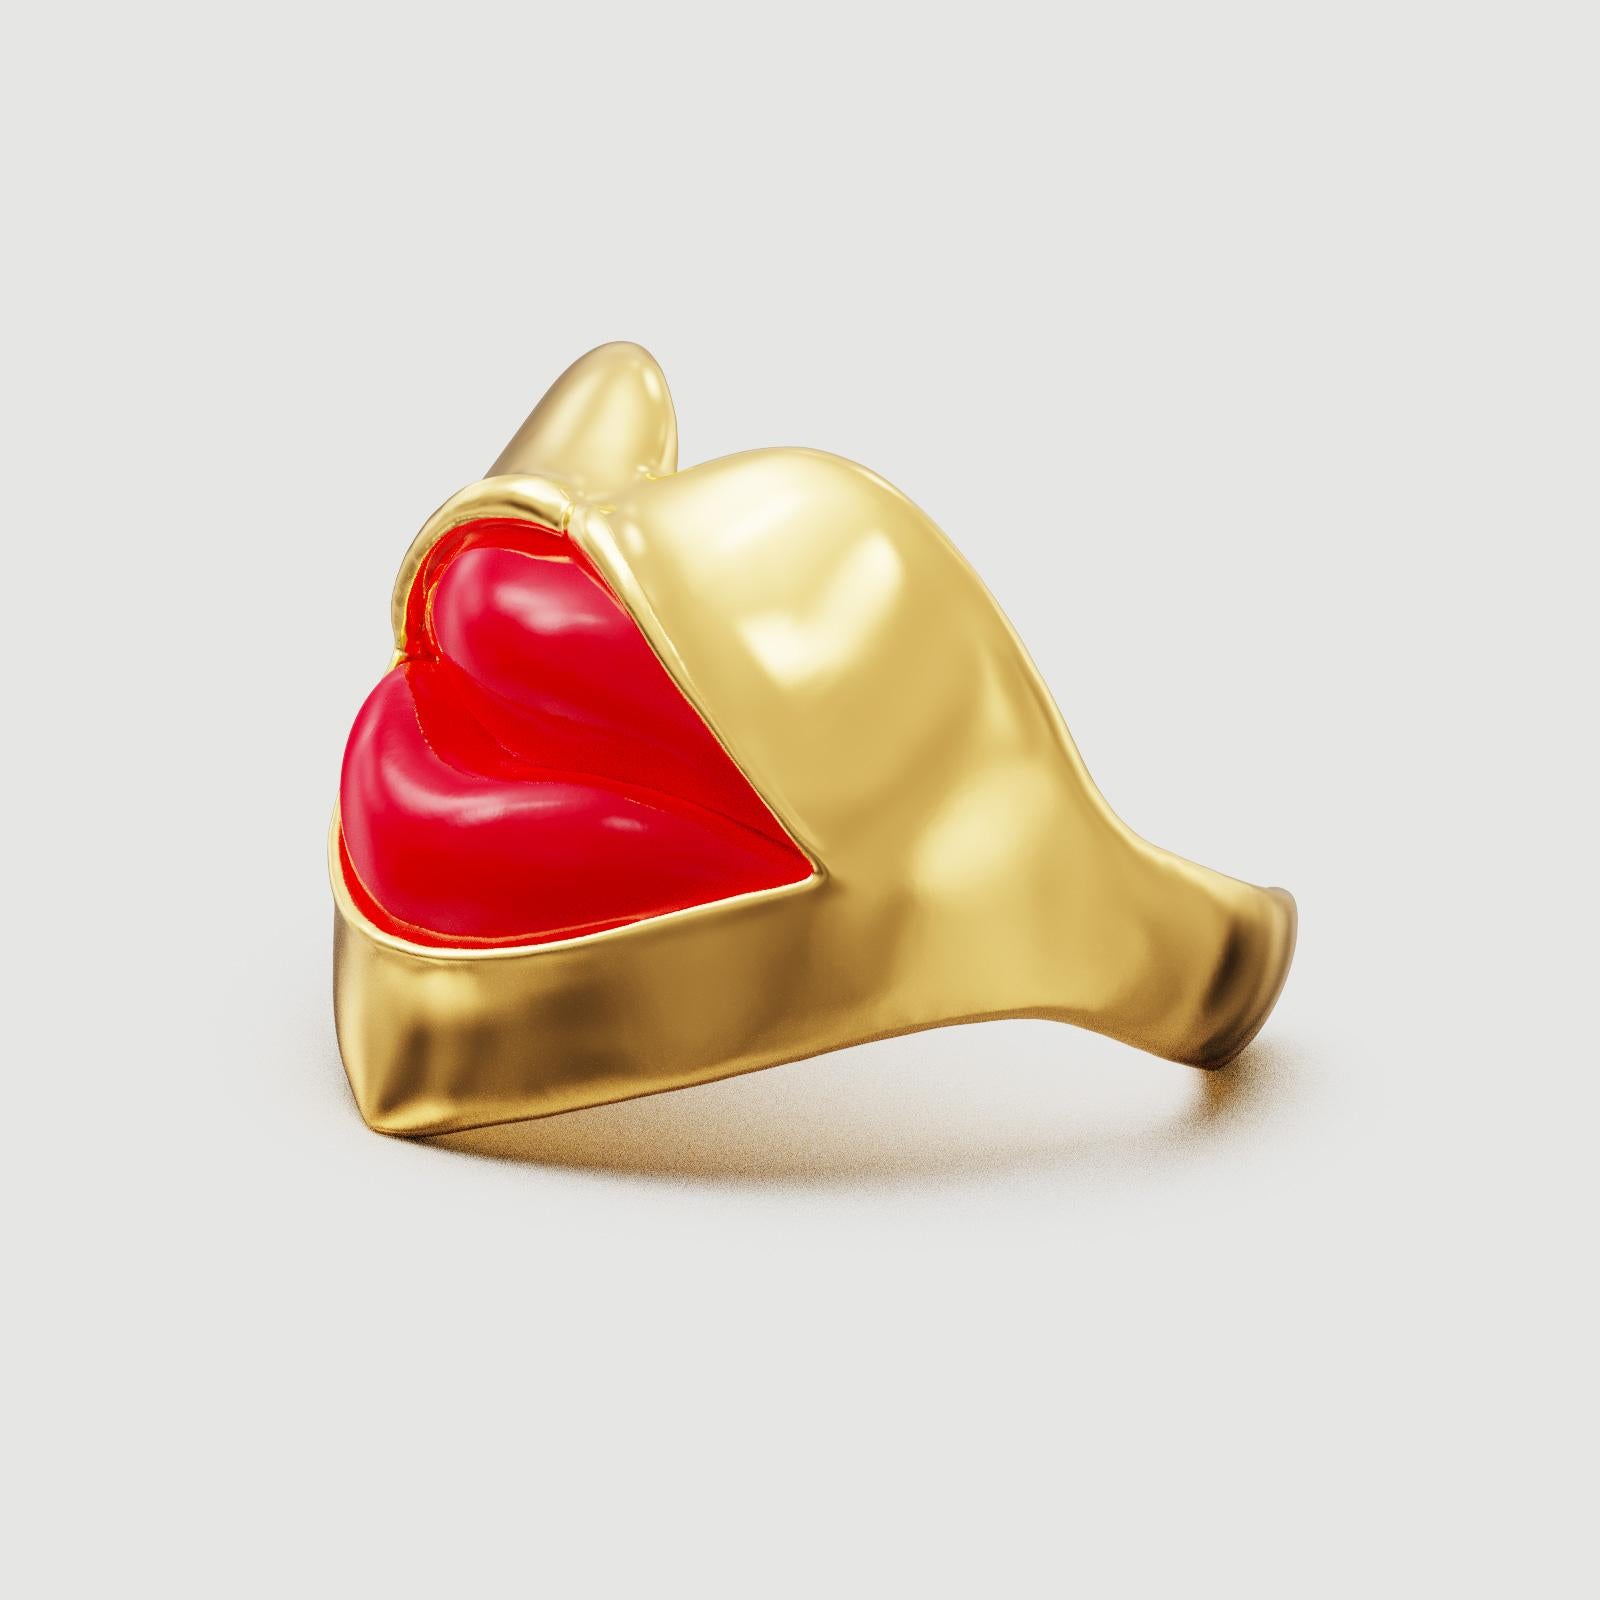 Introducing our captivating ❤️ Heart-Shaped Gold Vermeil Cuff with a bold 💋 Red Enamel Lip—a true masterpiece of pop-art and surrealism-inspired design. This exquisite jewelry piece combines the timeless elegance of gold with a daring contemporary